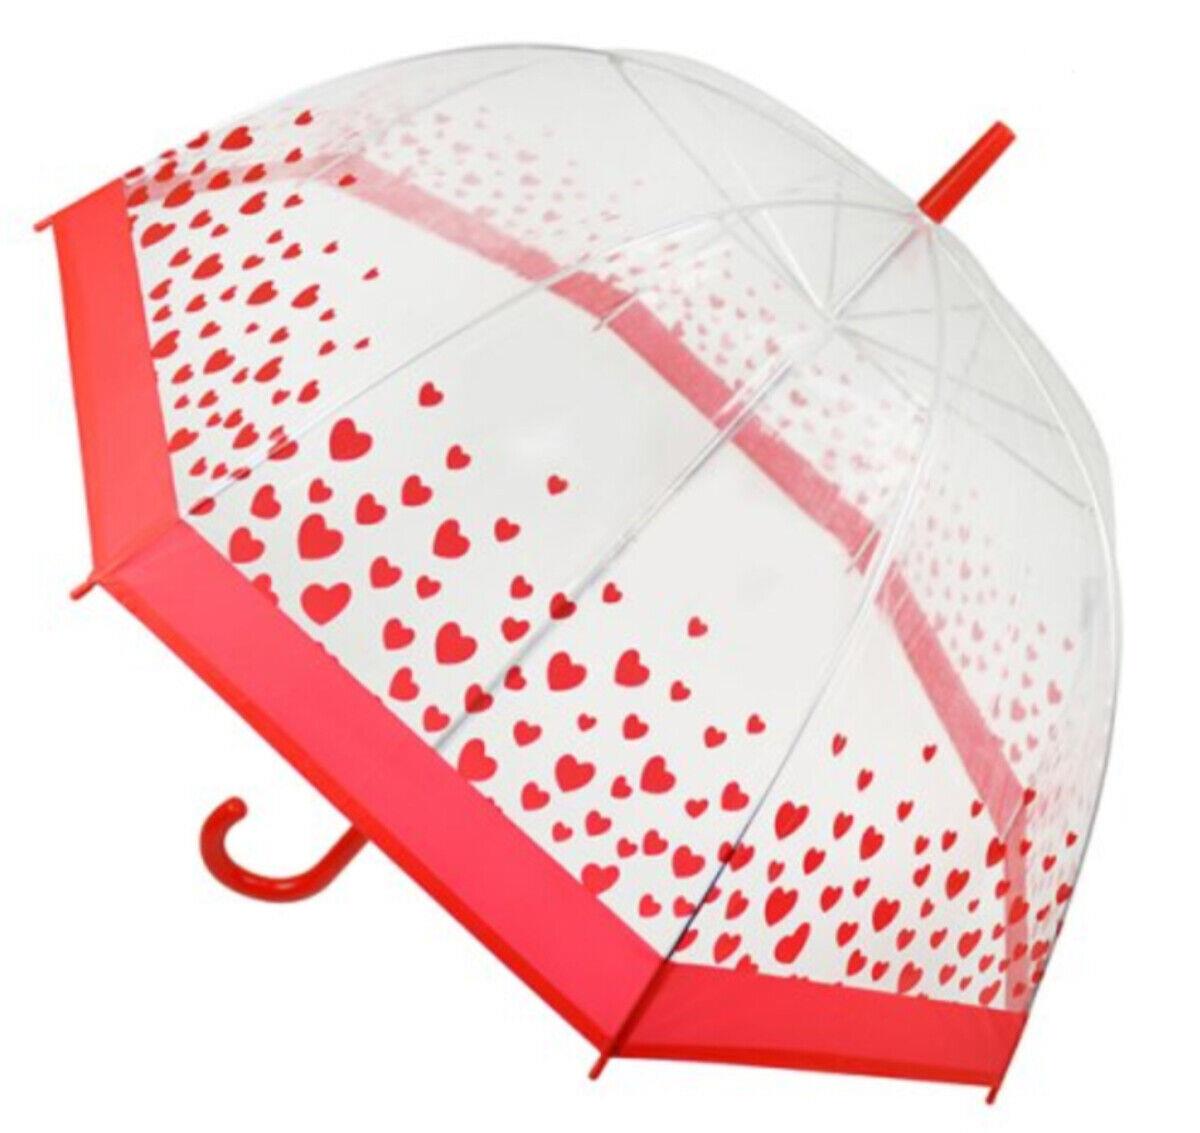 A2Z Ladies Transparent Dome Umbrella Wind and Rain Resist Outdoor Travel Brolly